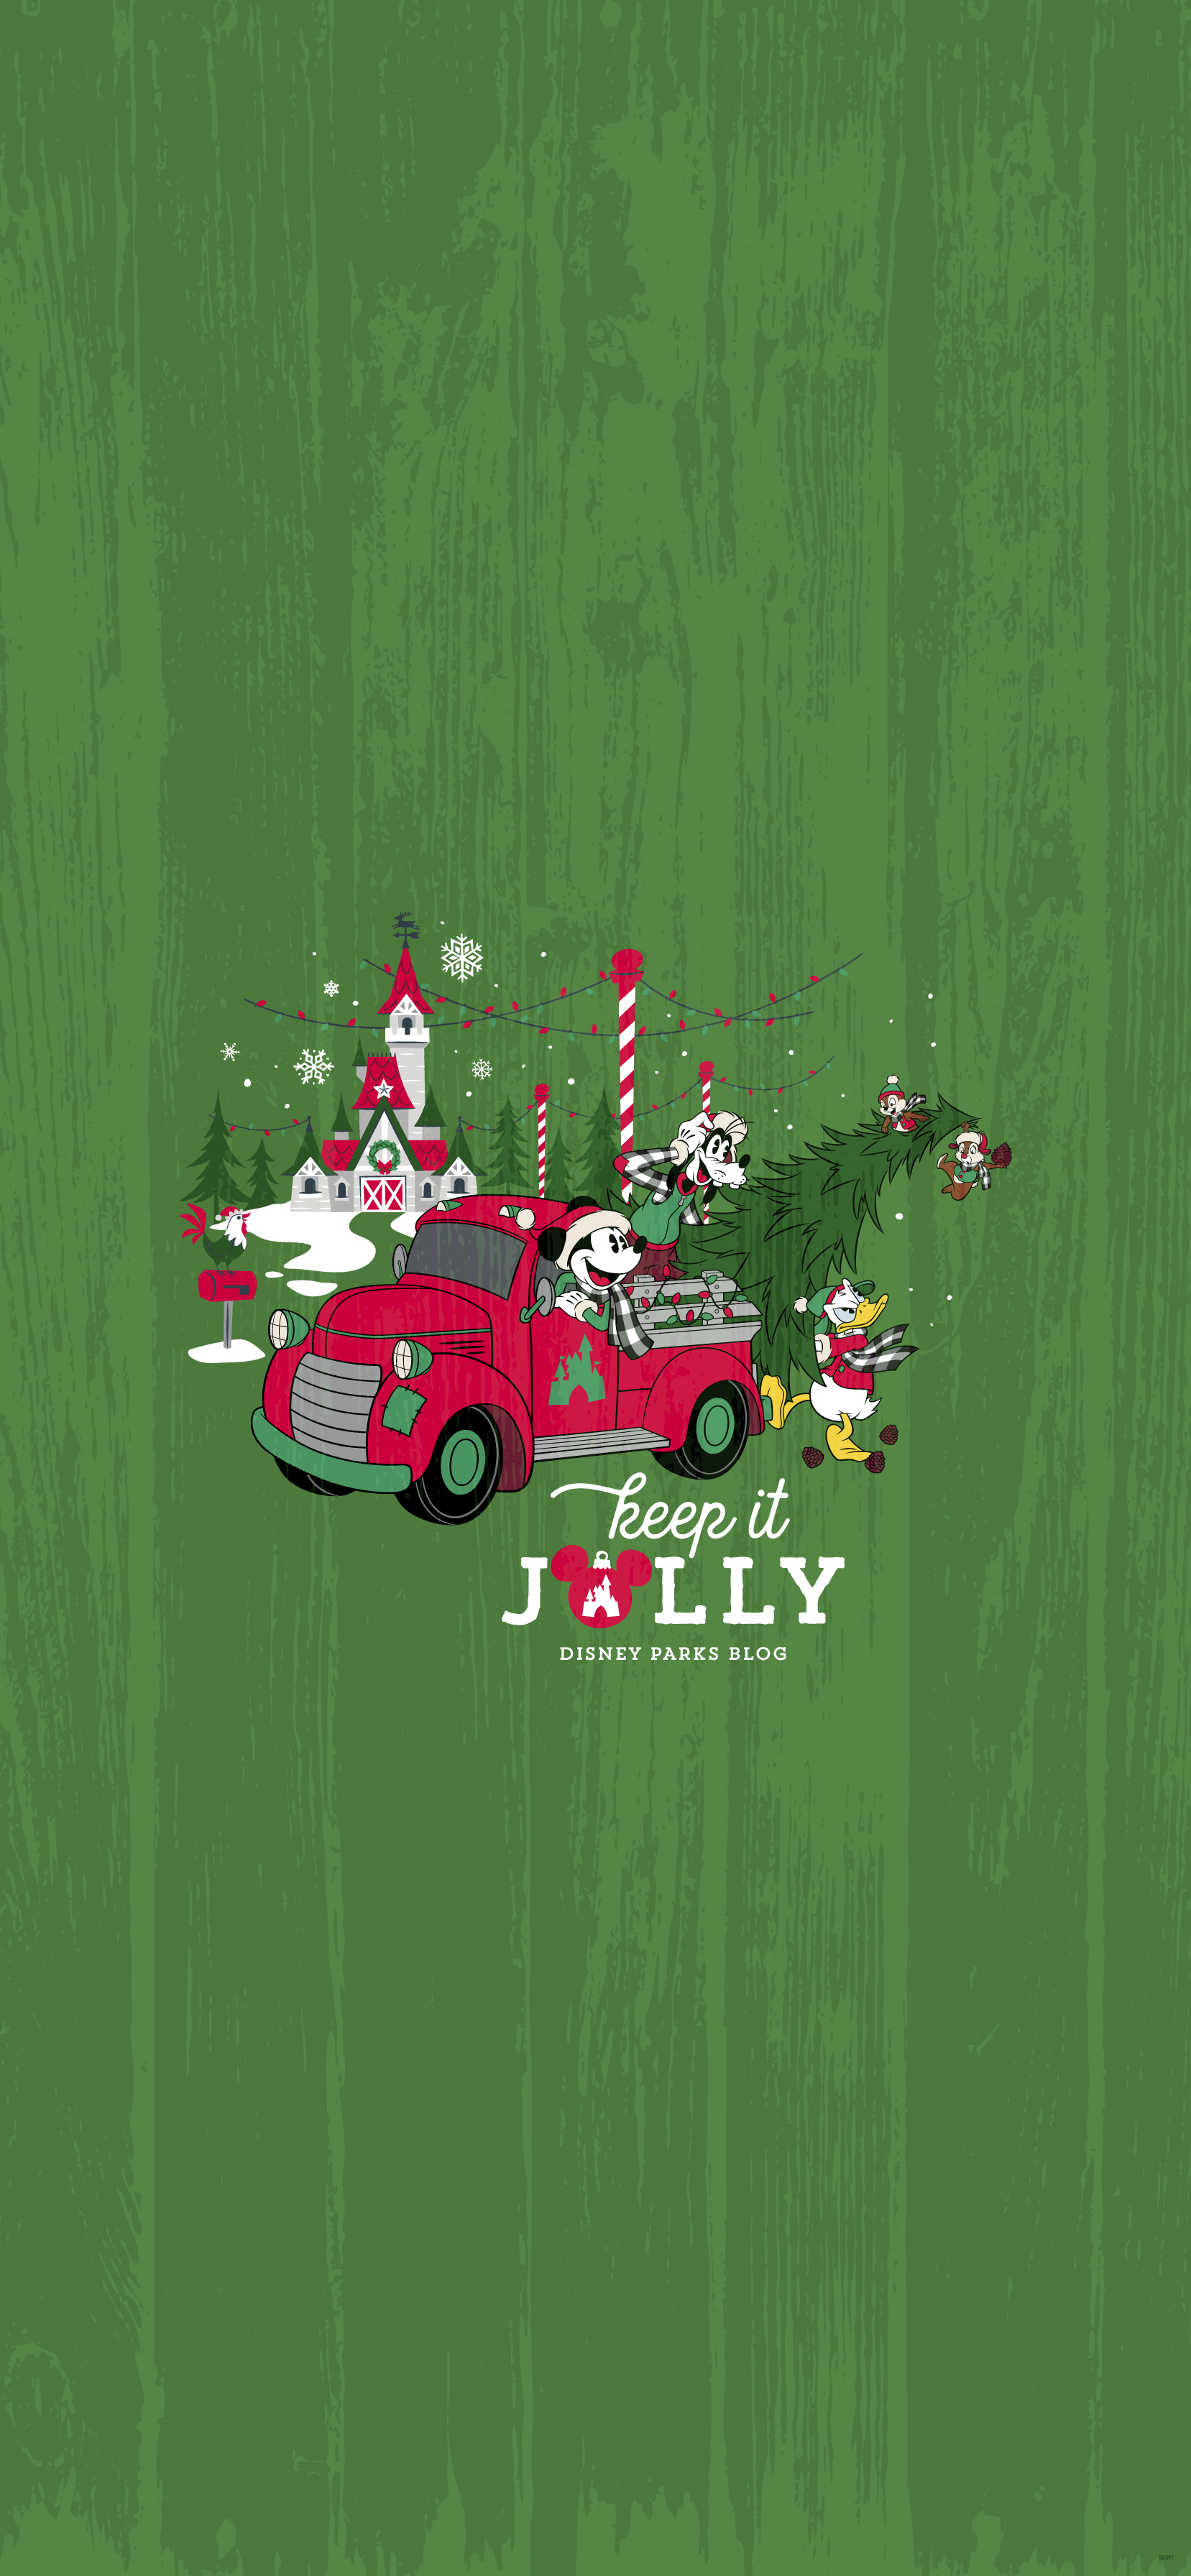 2019 'Yuletide Farmhouse Collection' Digital Wallpaper – iPhone/Android |  Disney Parks Blog